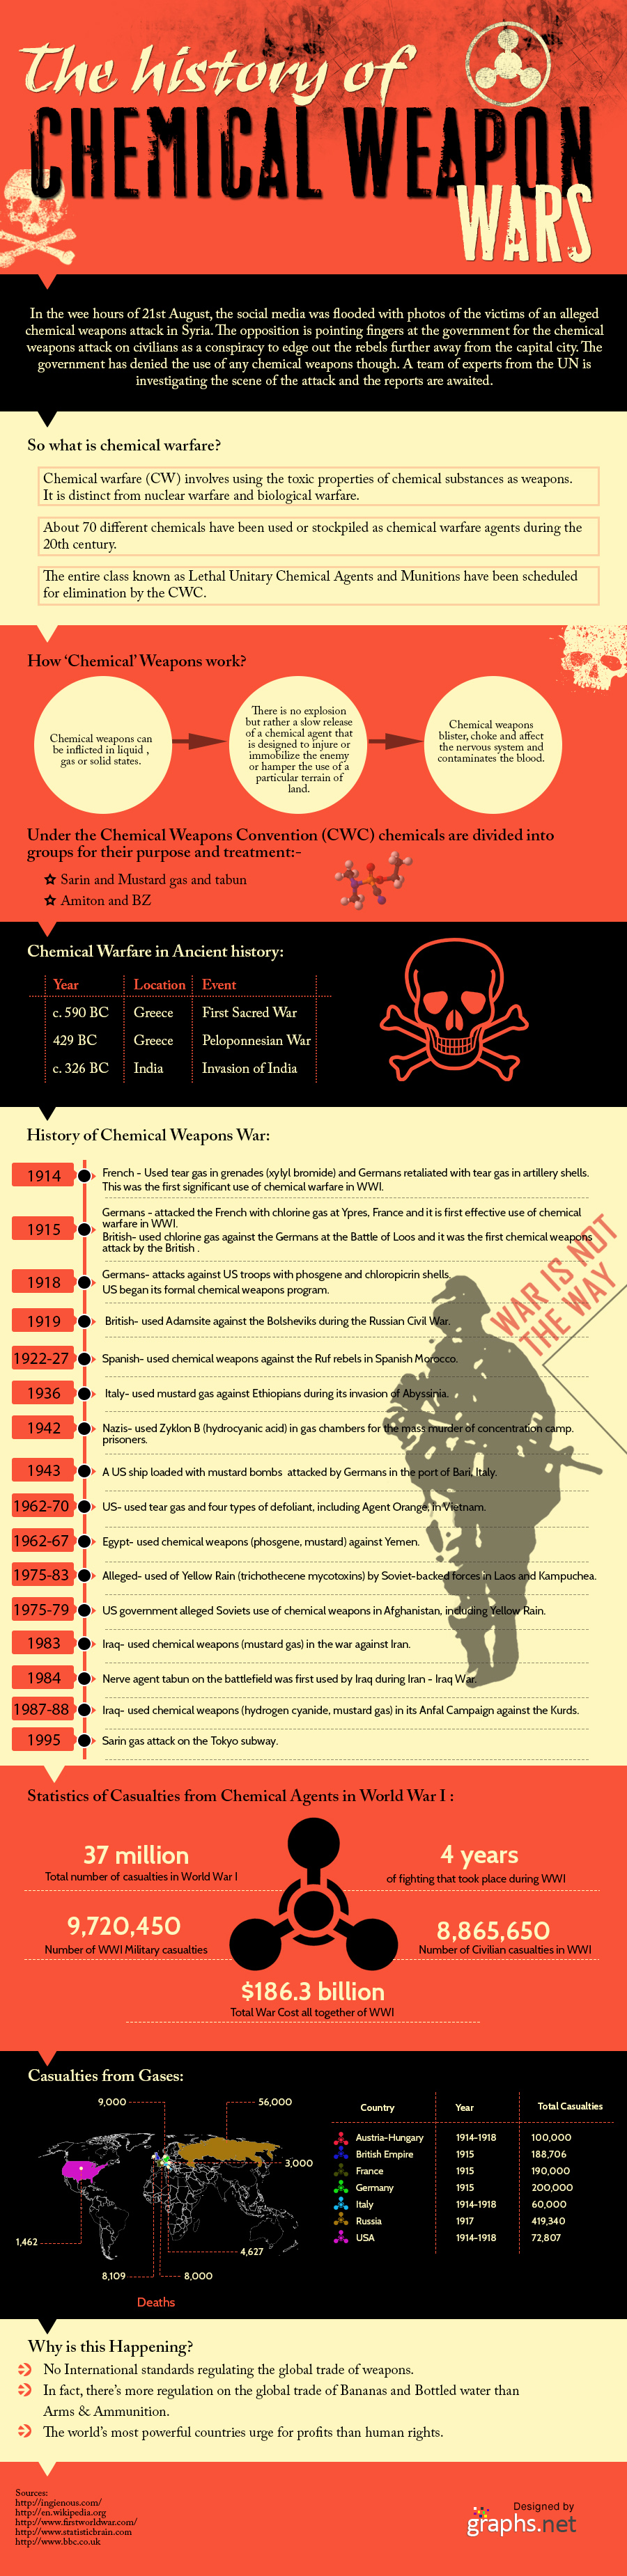 The History of Chemical Weapon Wars